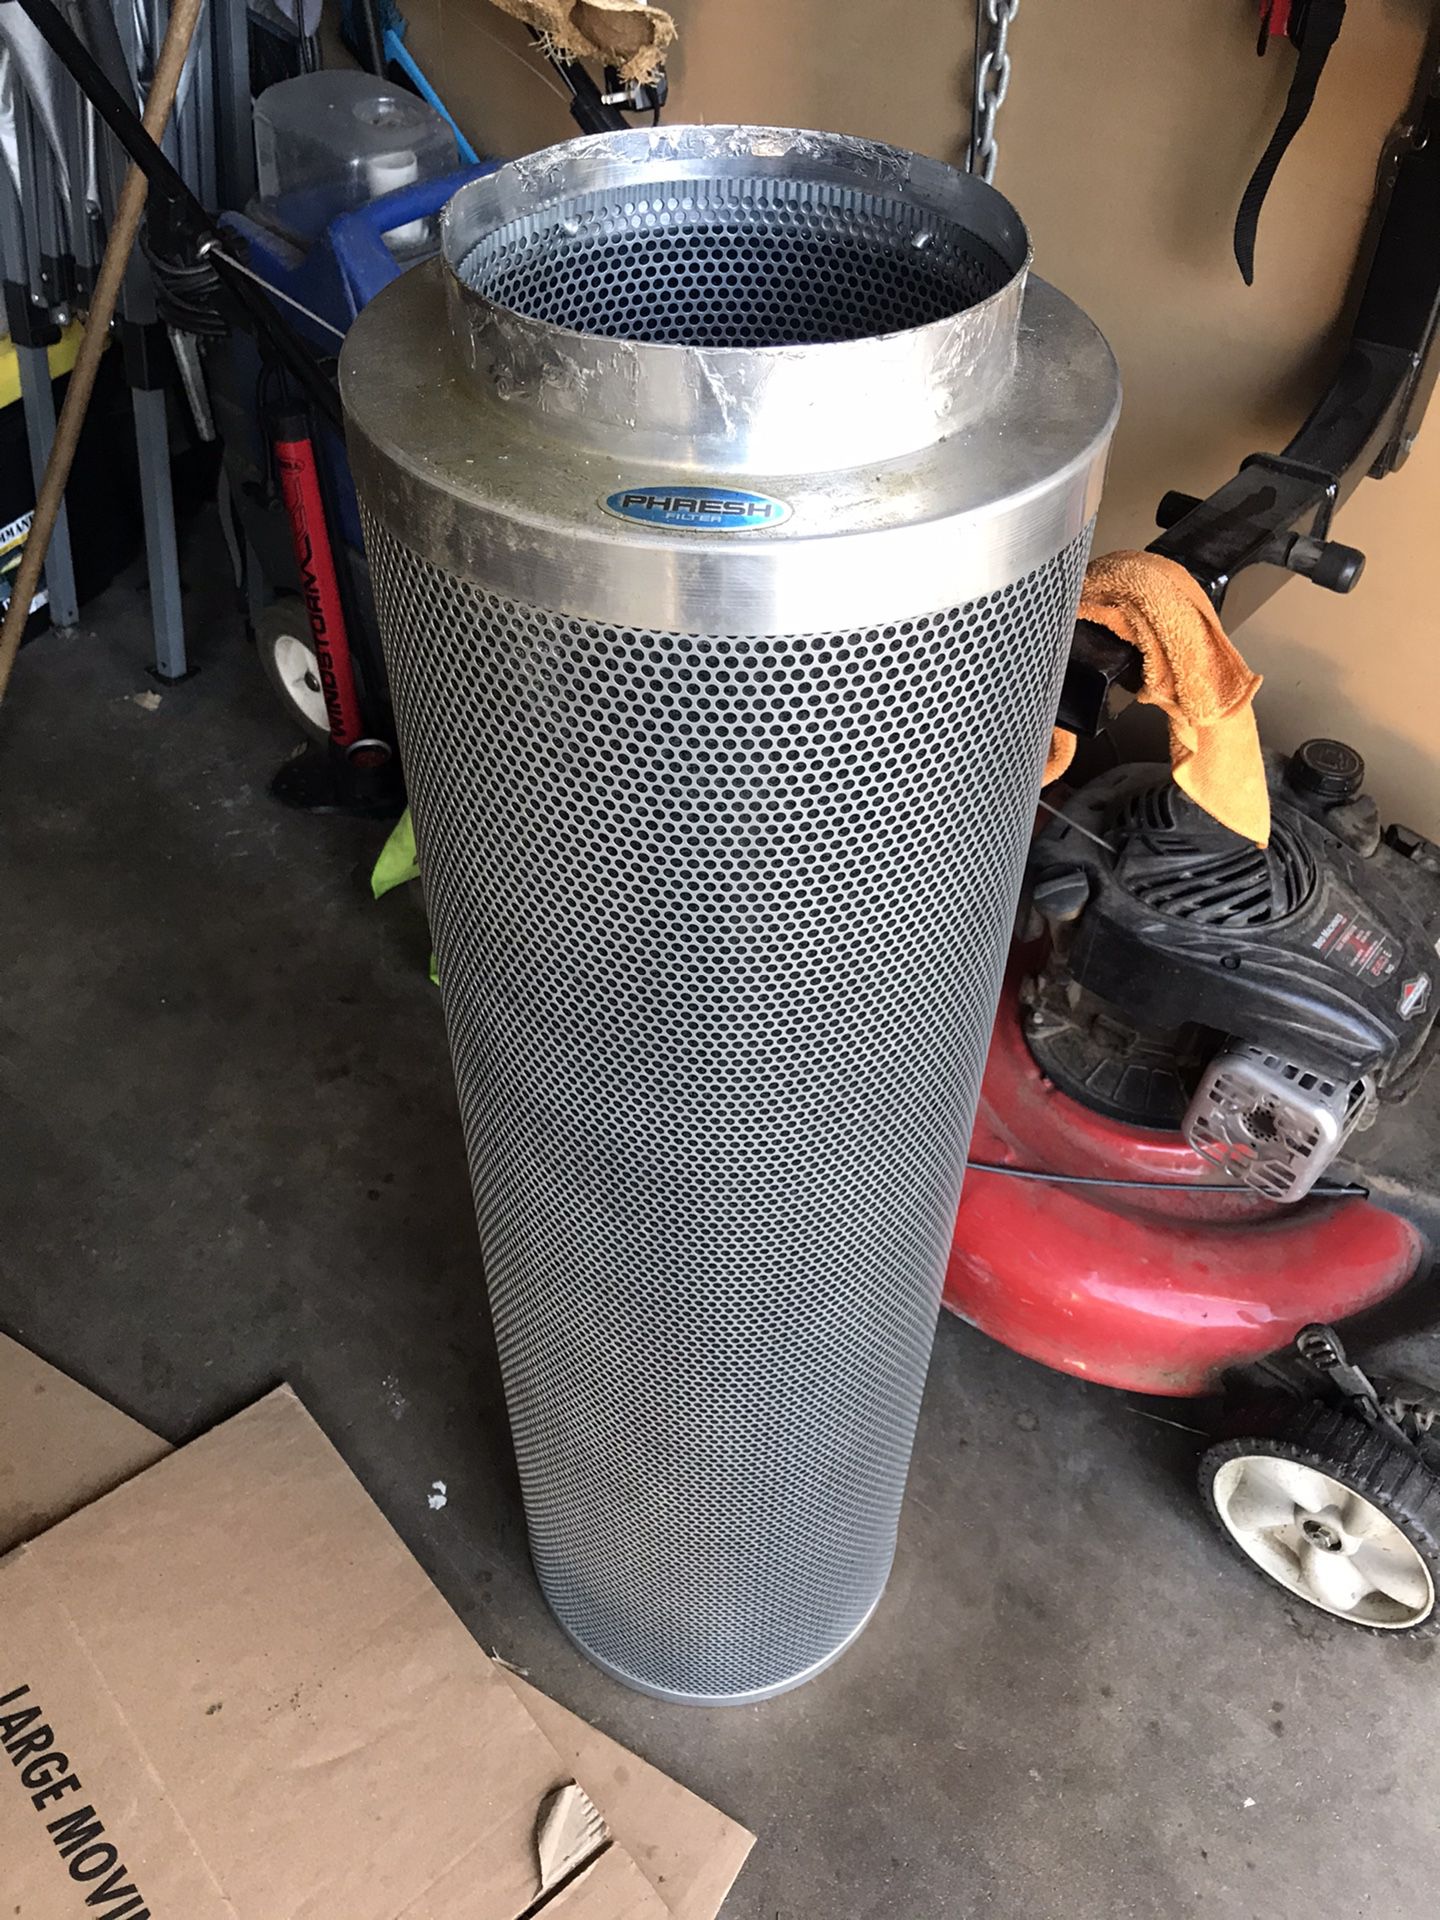 Carbon filter and filter cover